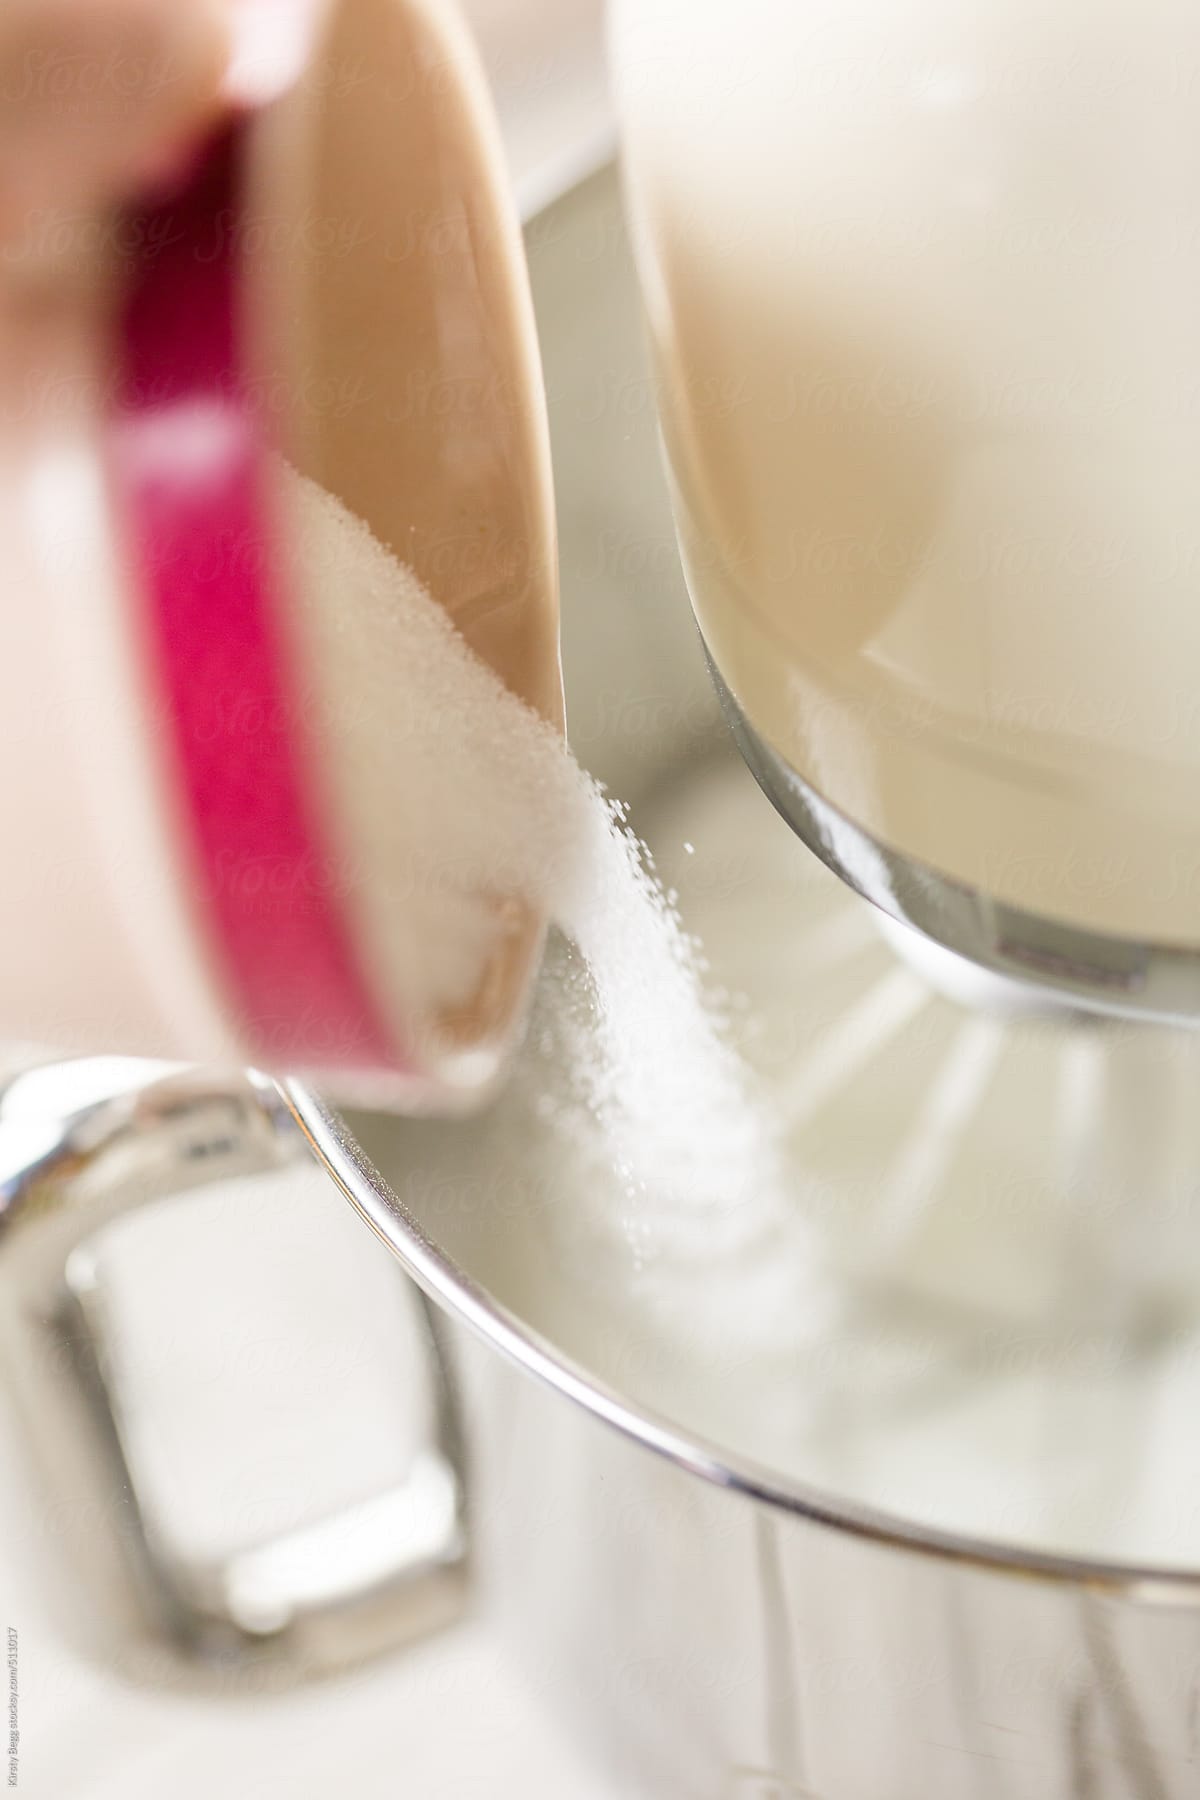 Sugar being poured into whisked egg whites